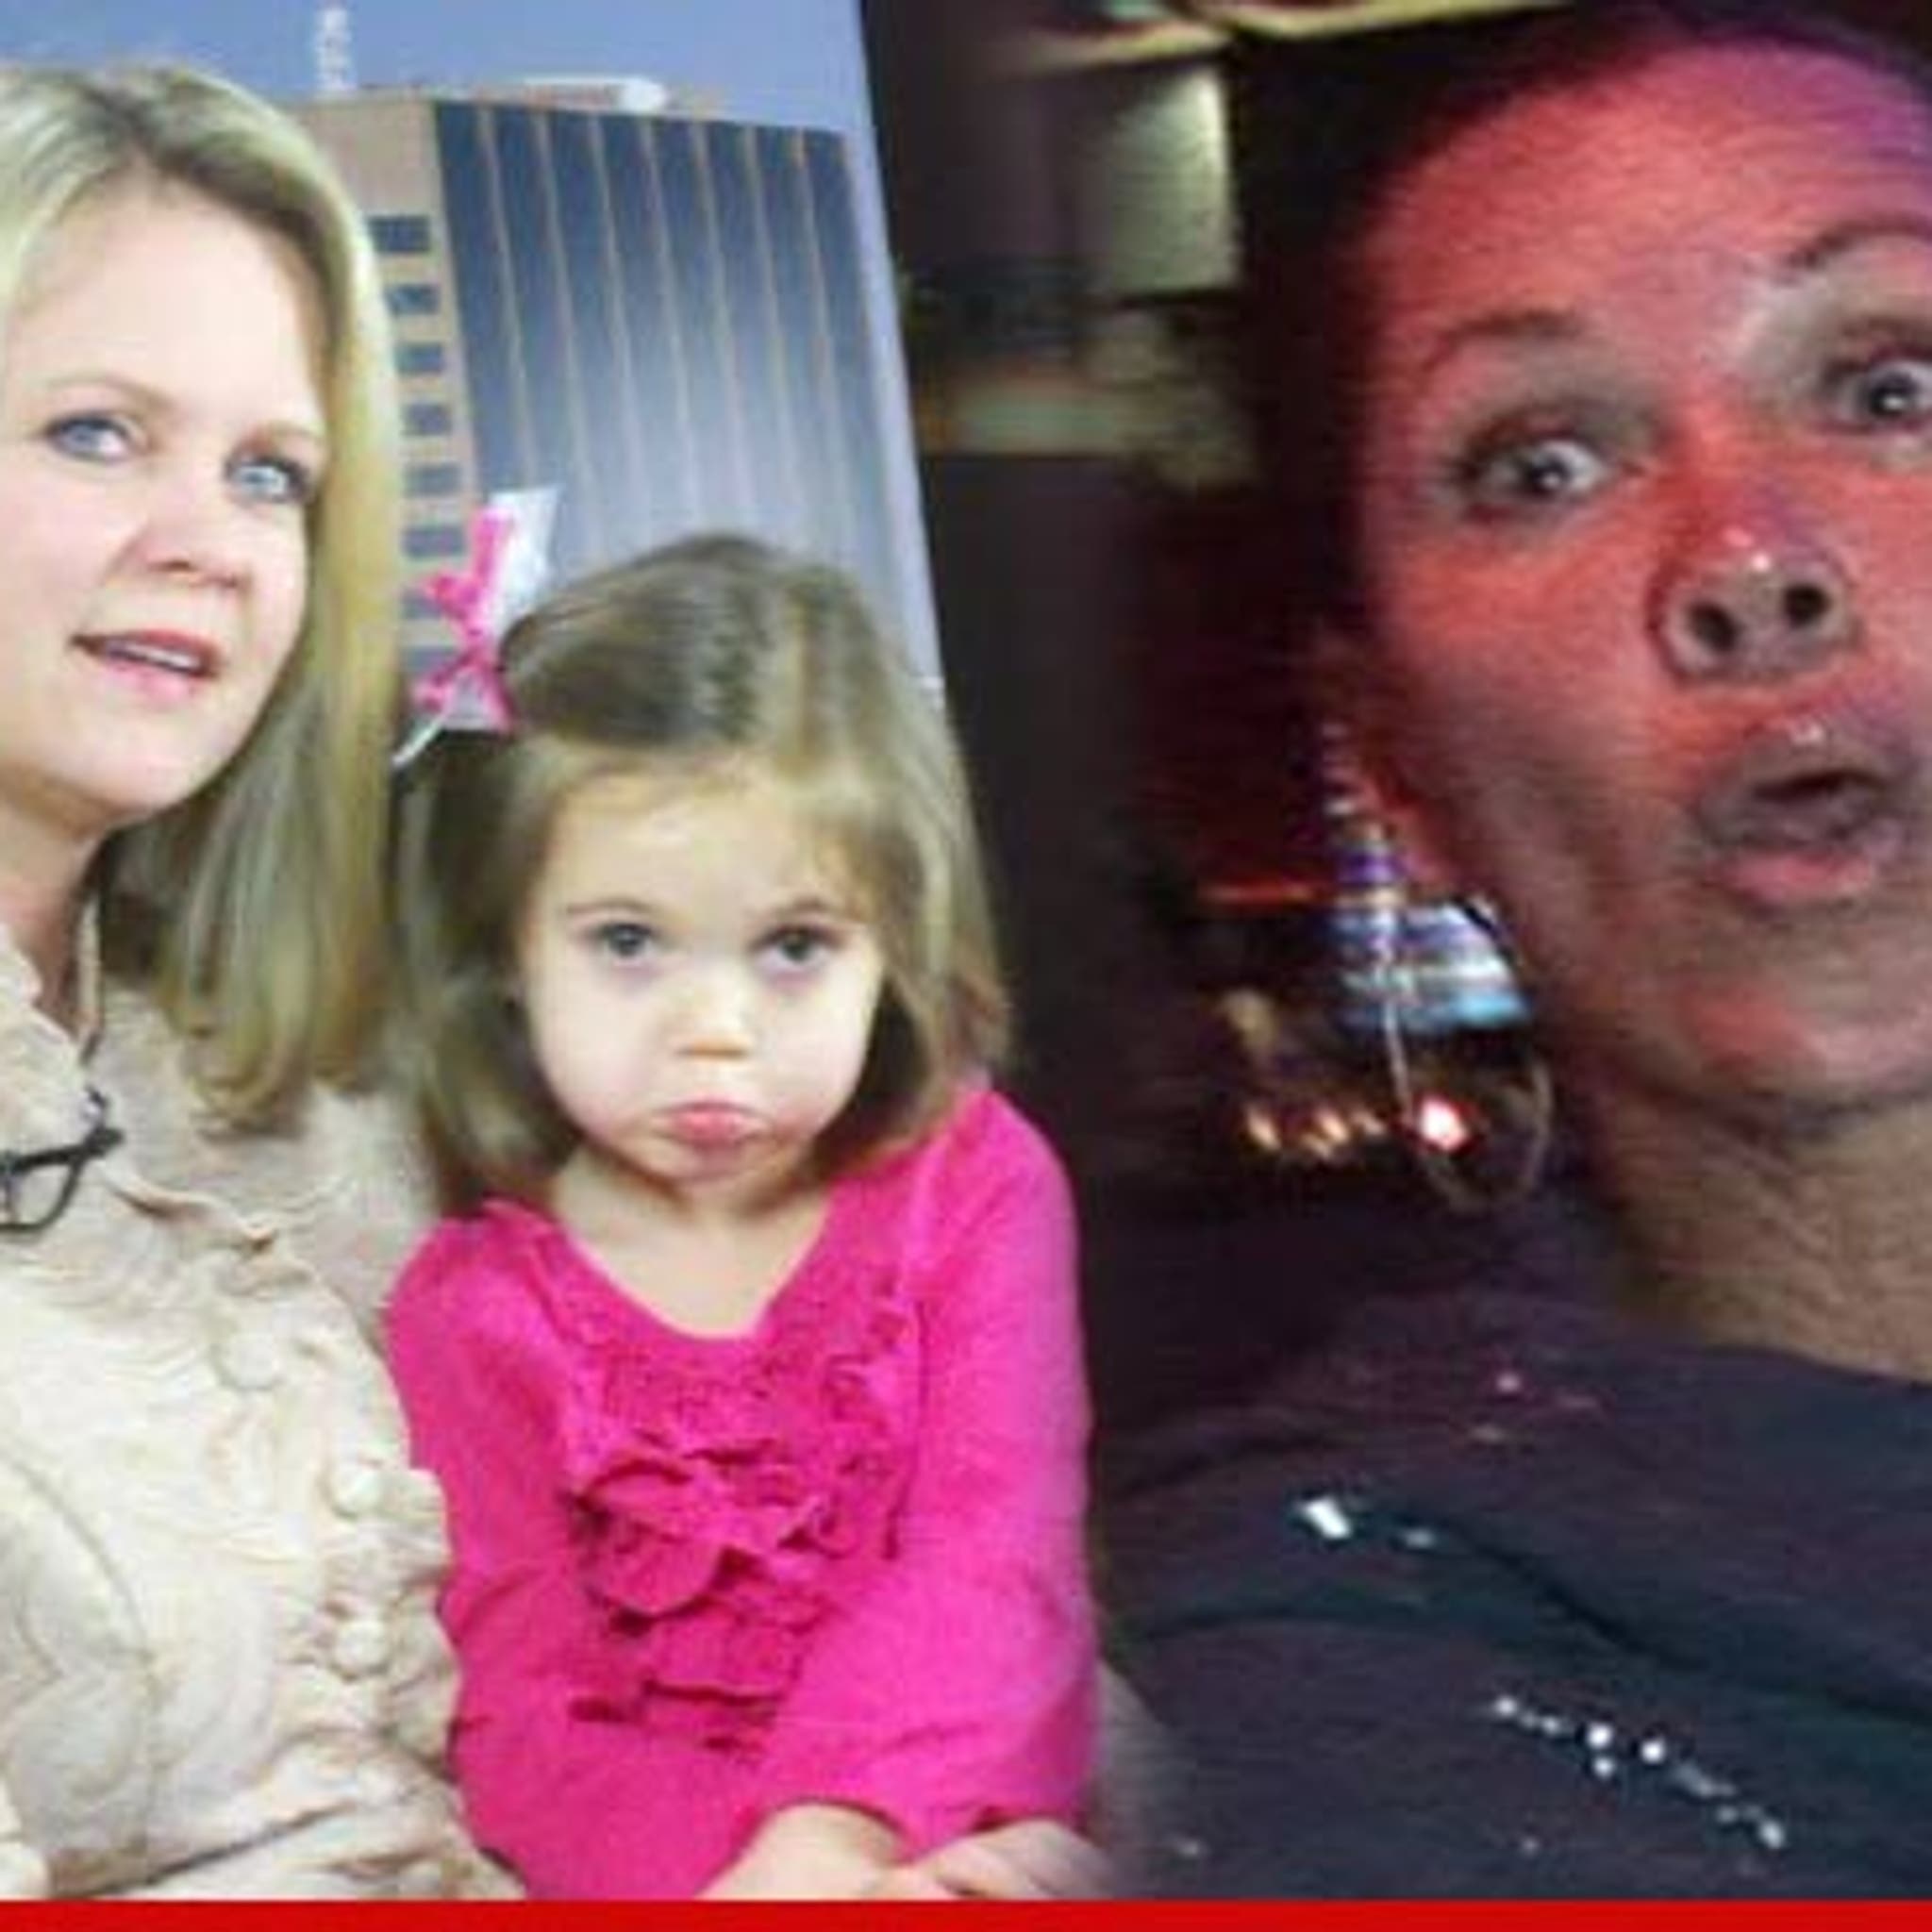 VANESSA WILLIAMS TO HER COLLEGE-BOUND DAUGHTER: 'ONCE YOU'RE OUT